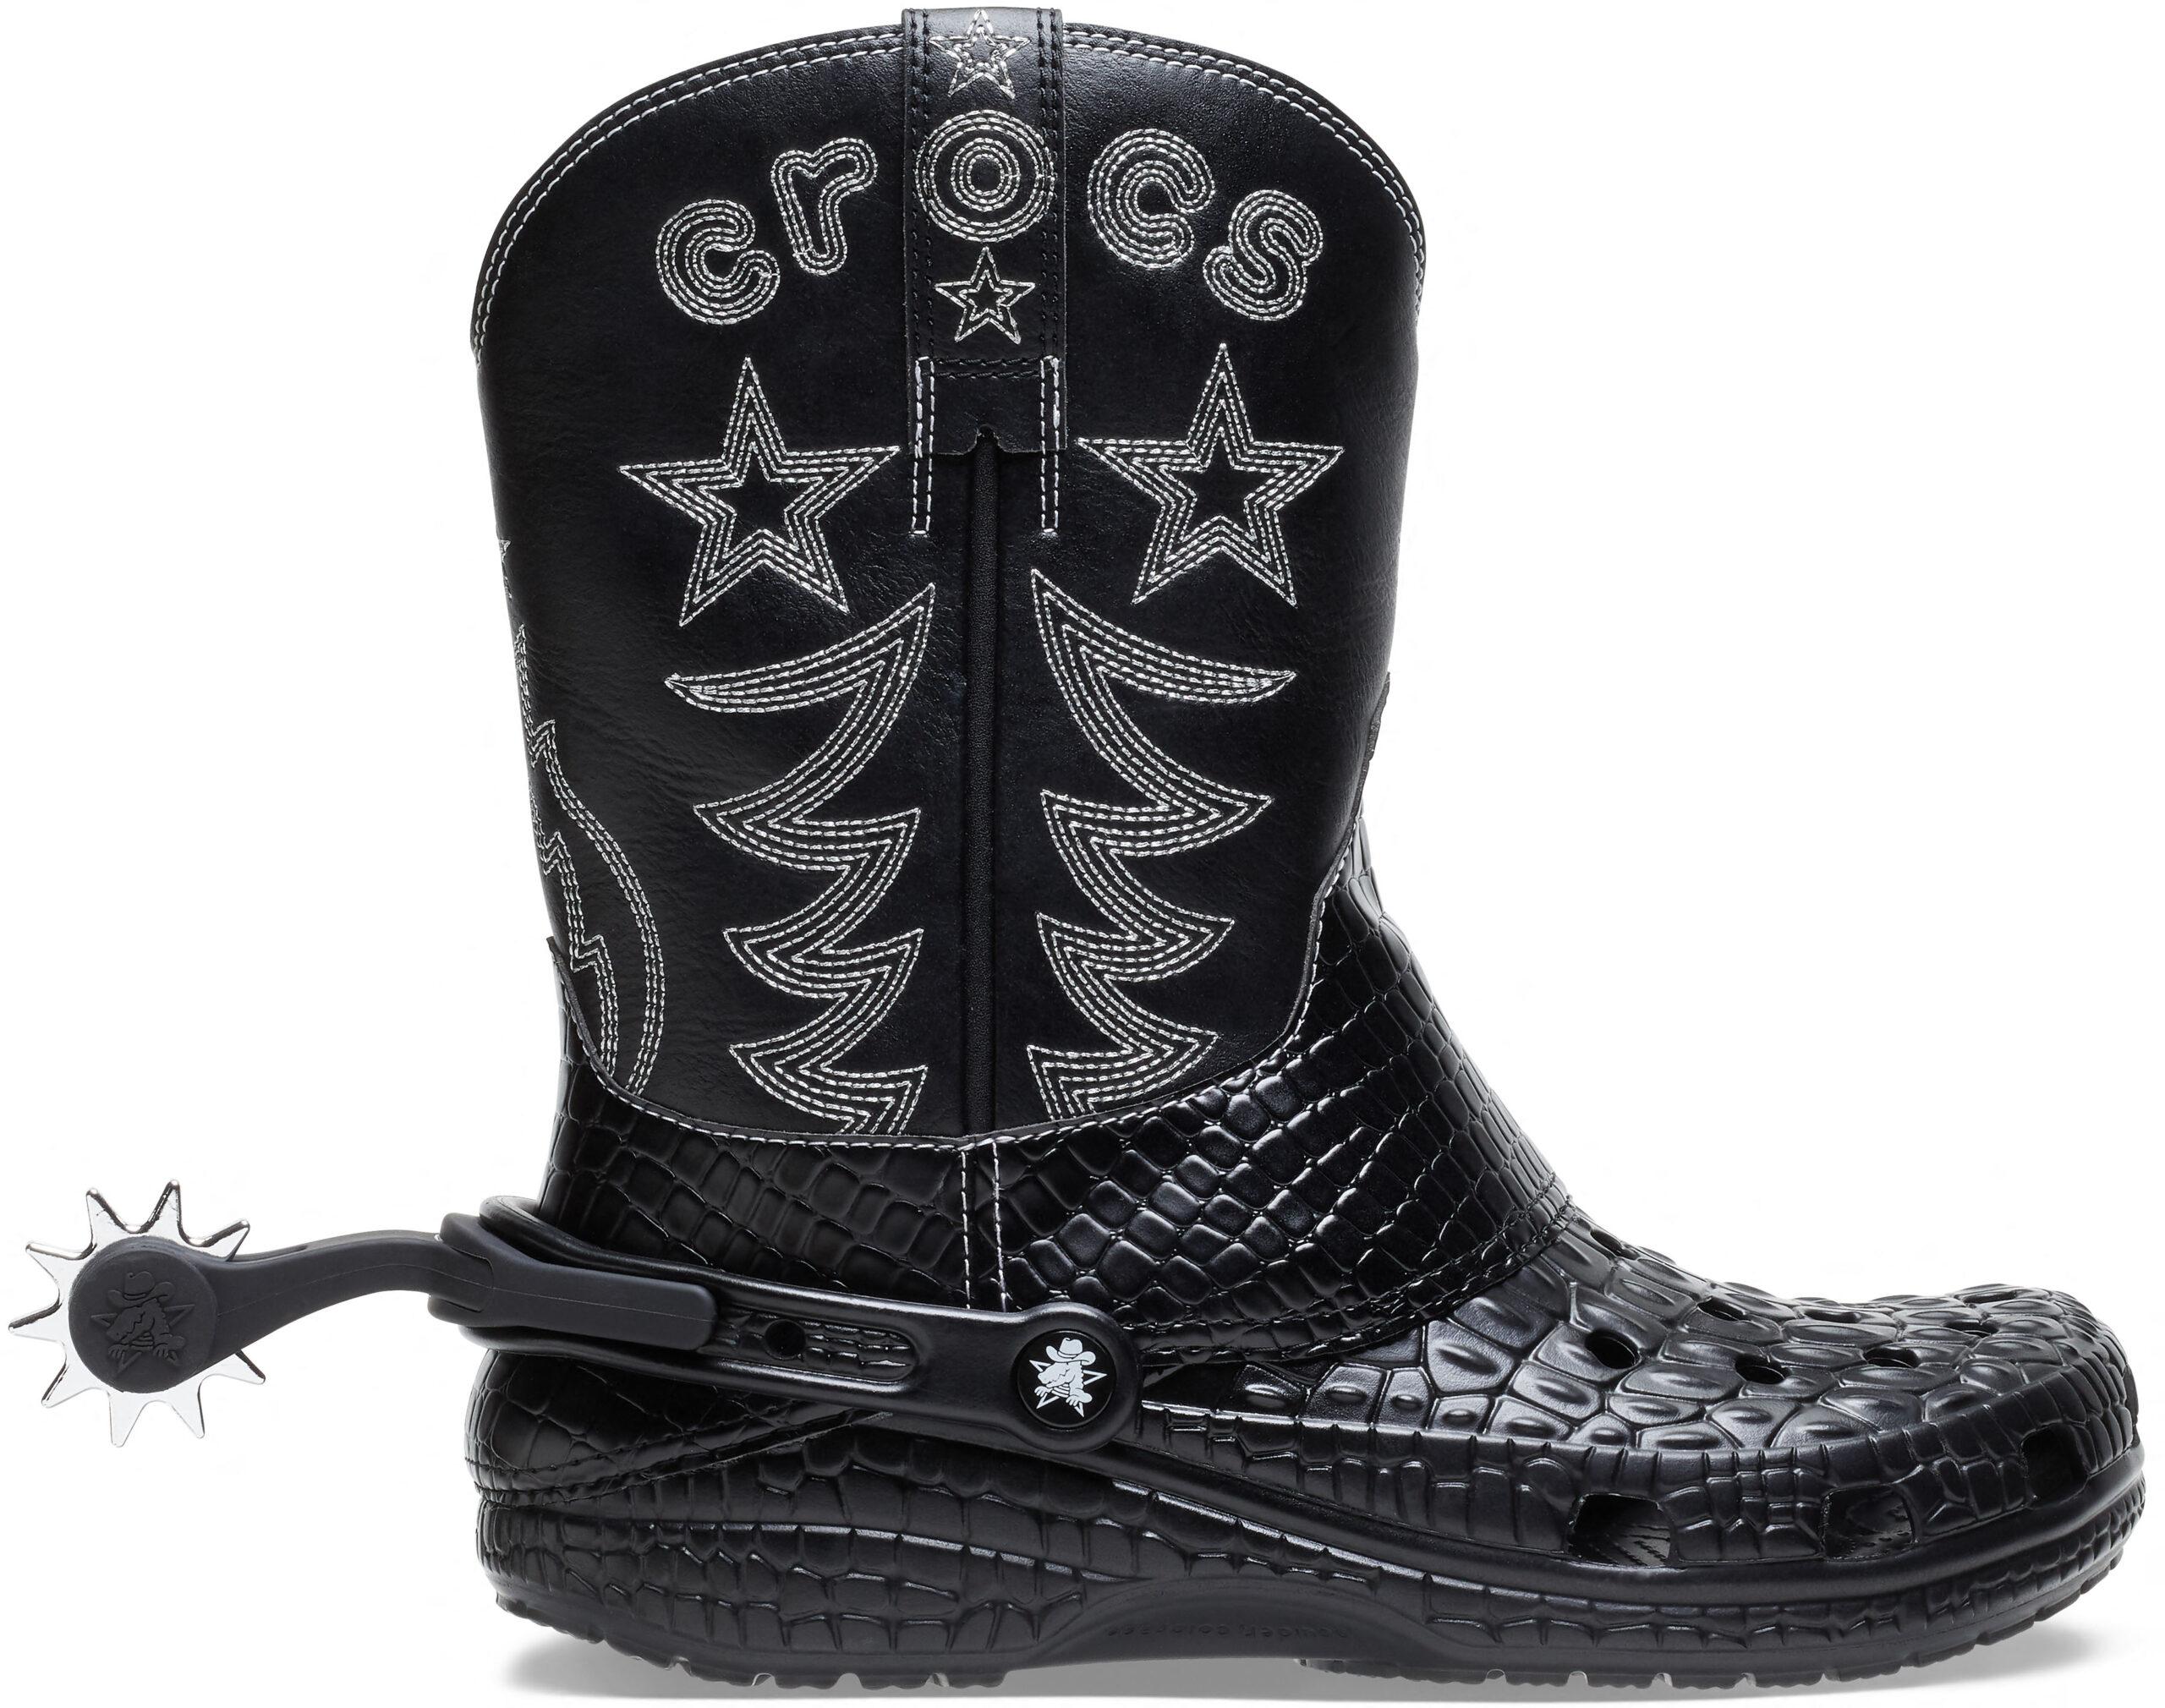 Crocs unveils new cowboy boots complete with spurs as it kicks off its Croctober festivities